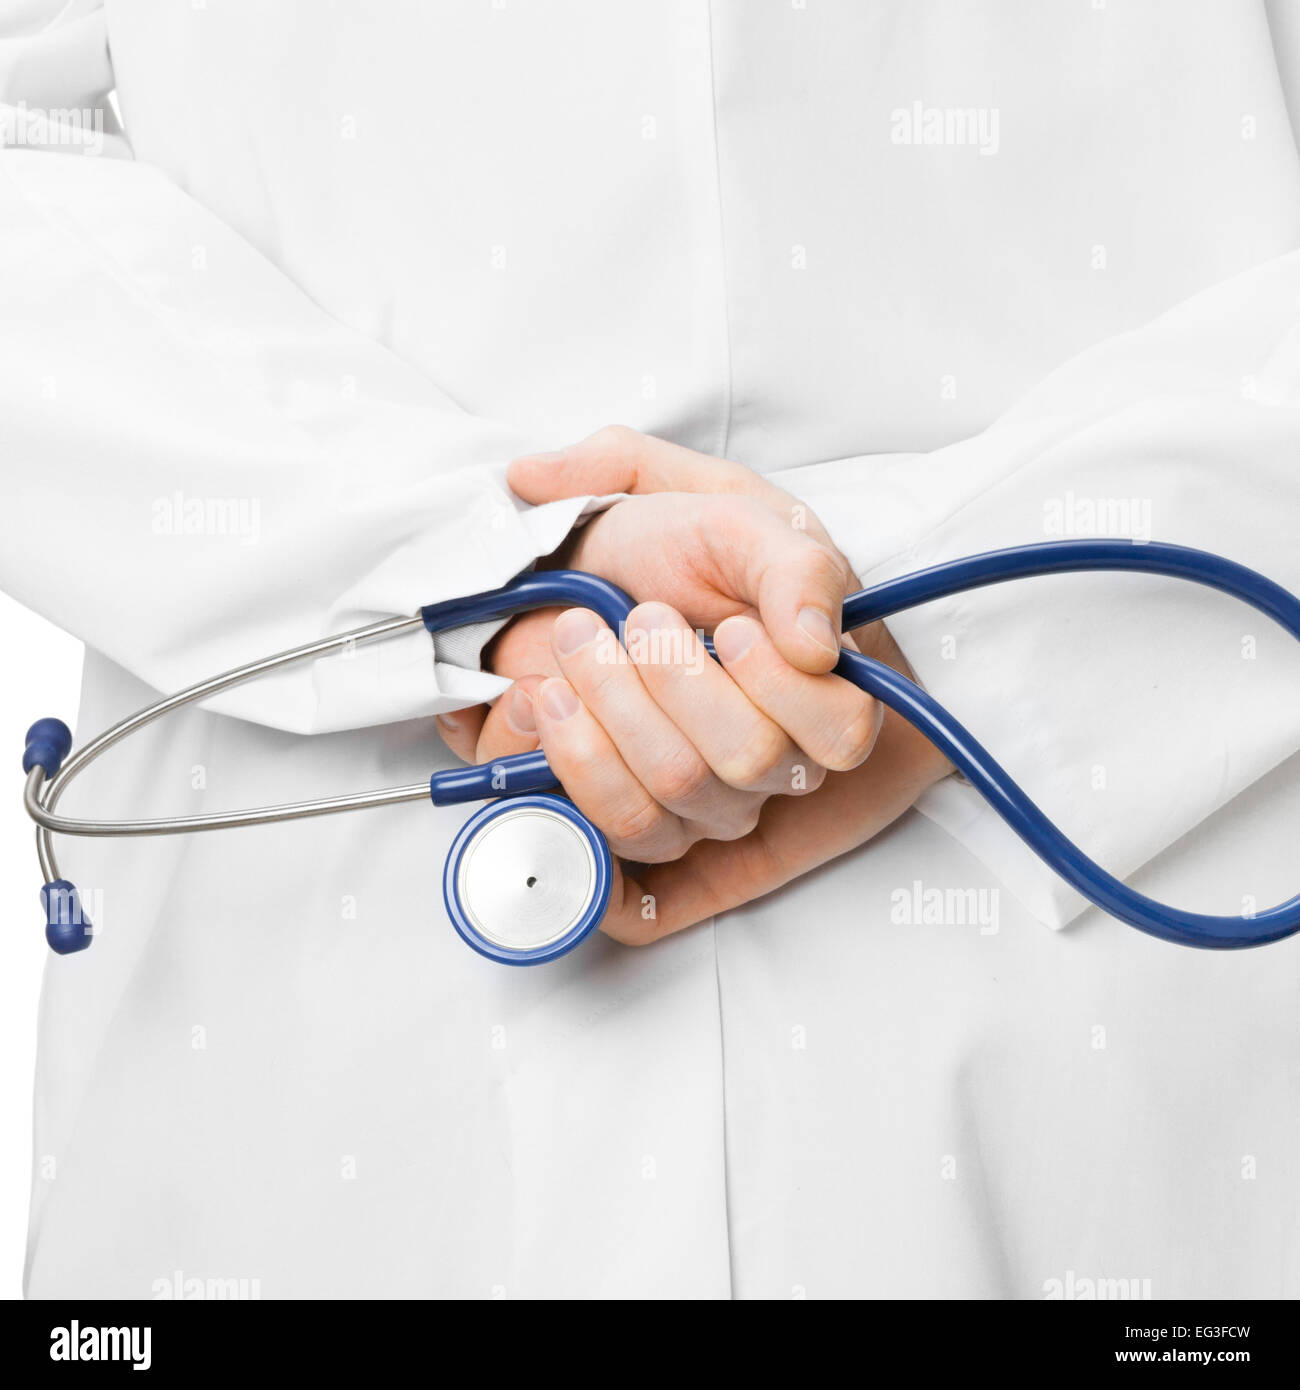 Medical Doctor With A Stethoscope And Hands Behind His Back Stock Photo